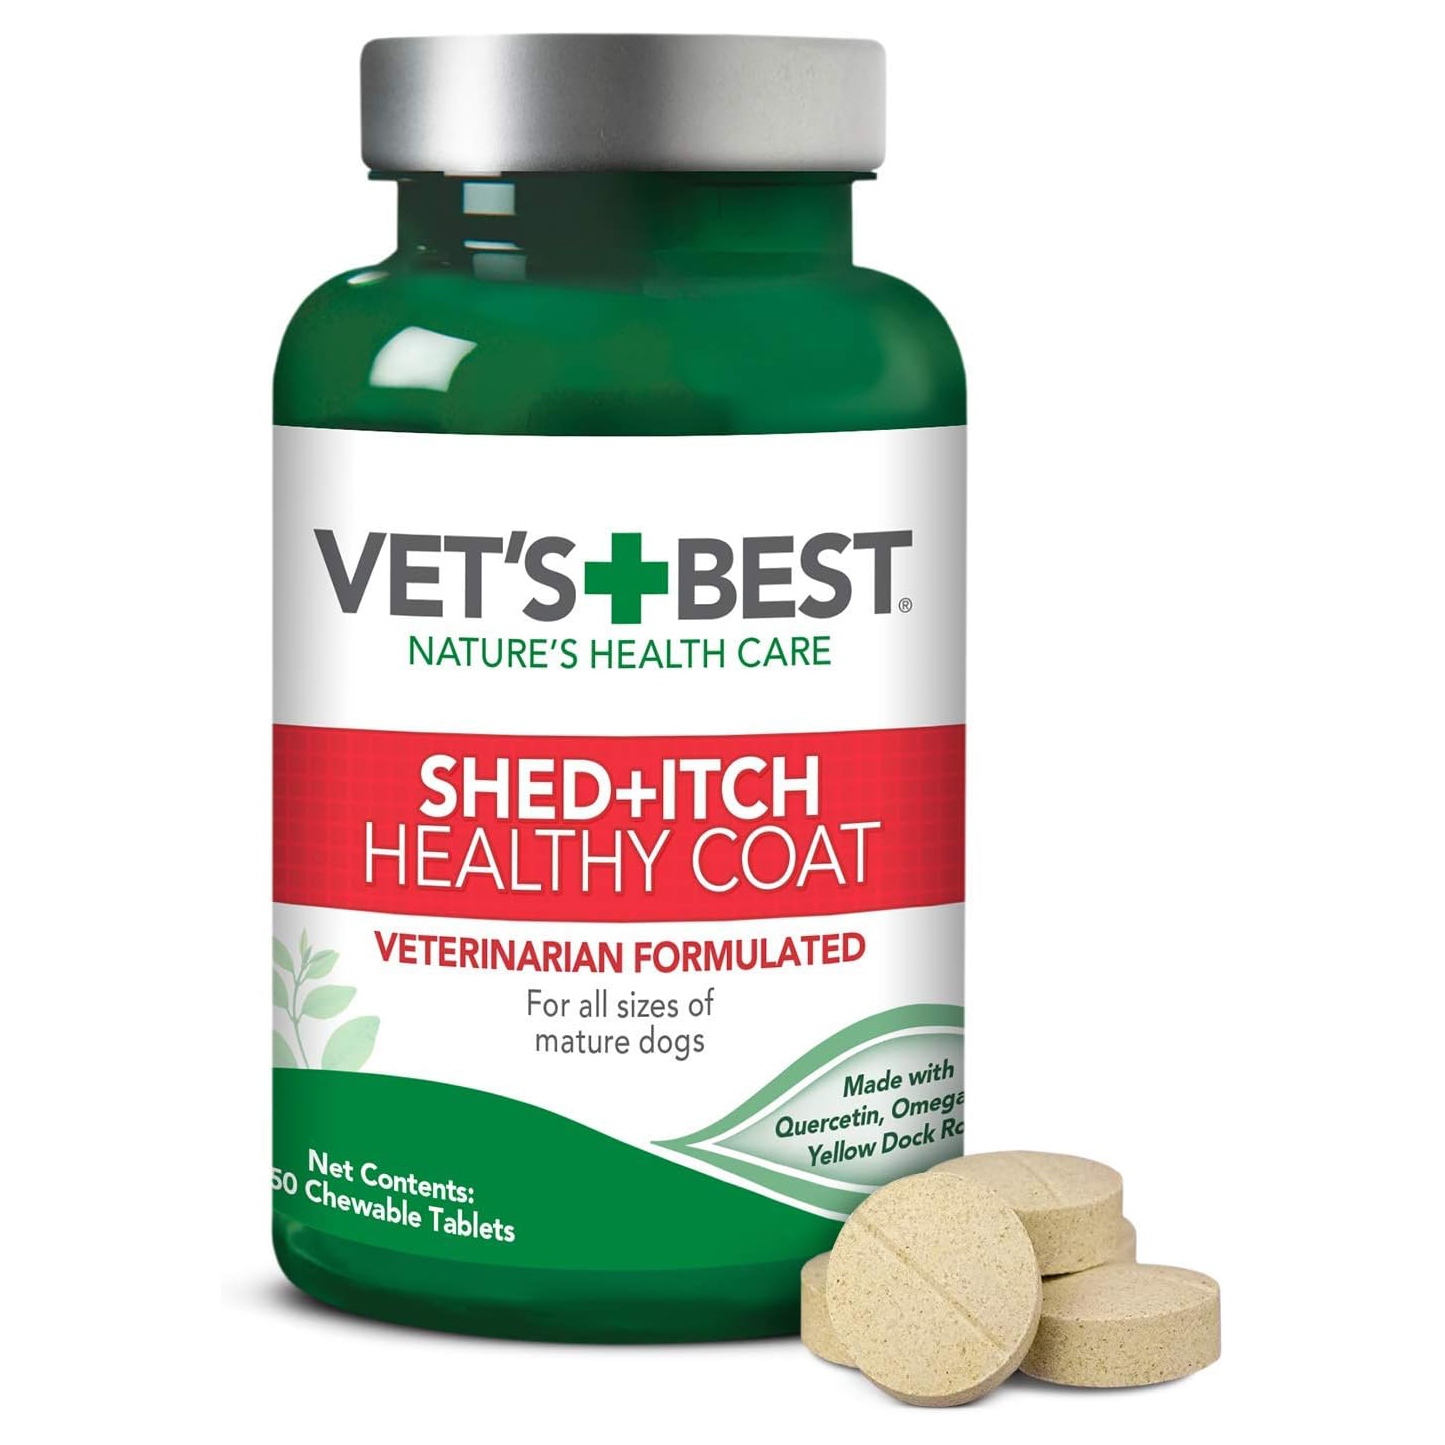 Vet's Best Shed+Itch Healthy Coat Chewable Tablets Skin & Coat Supplement for Dogs